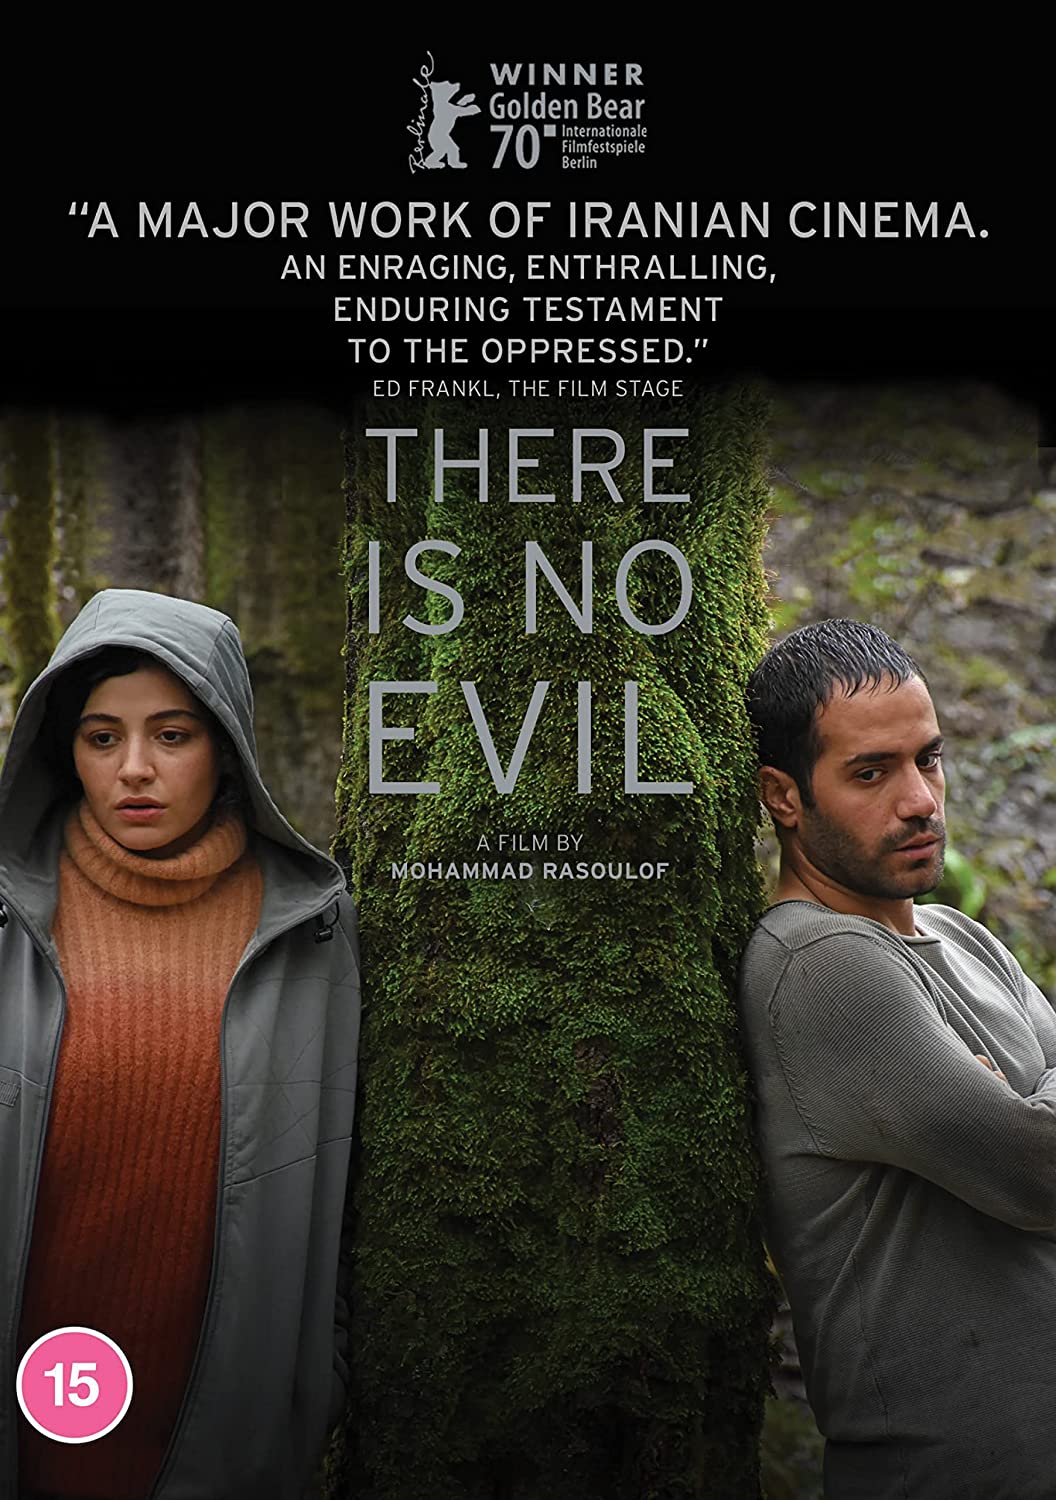 There is no evil [DVD]